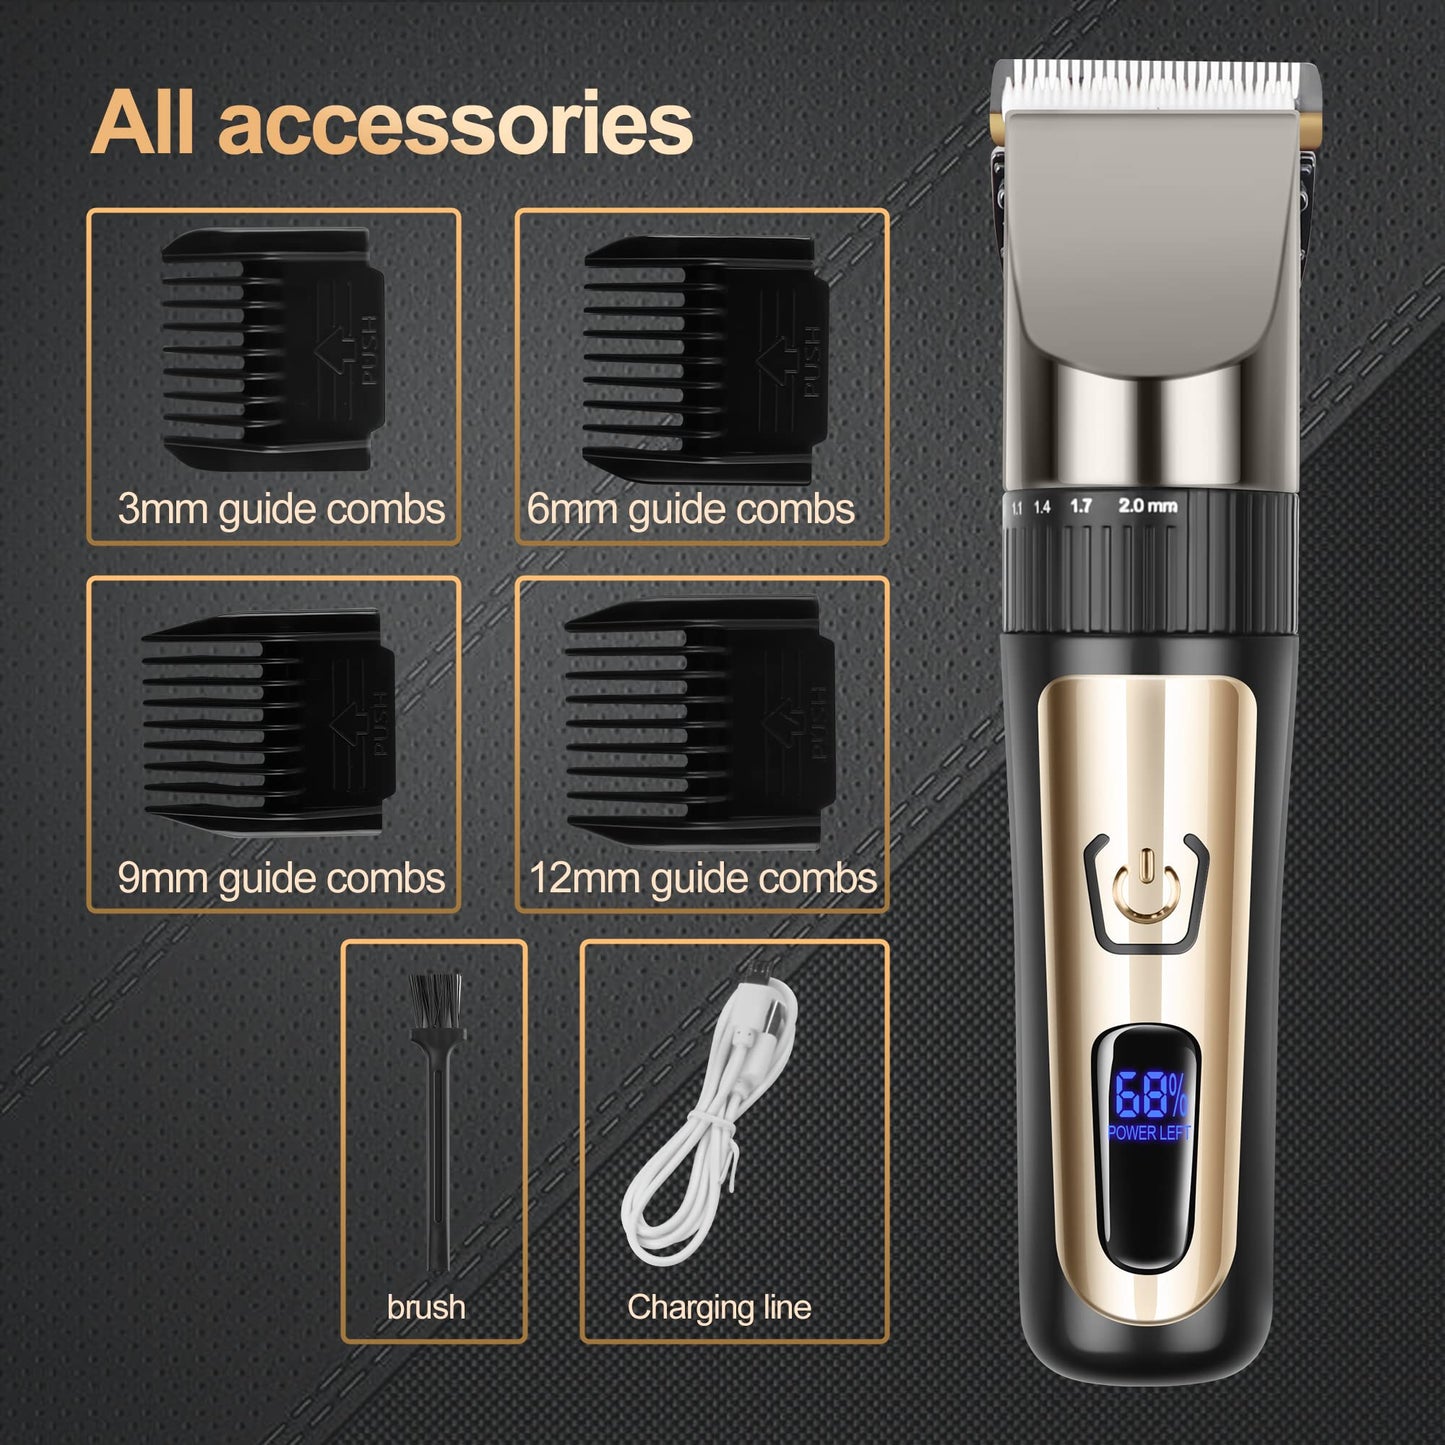 Hair Clippers for Men, Cordless LCD Rechargeable Hair Trimmer Beard Trimmer for Men, Men's Grooming Kit for Hair, Face, Beard, Professional Electric Barber Clippers